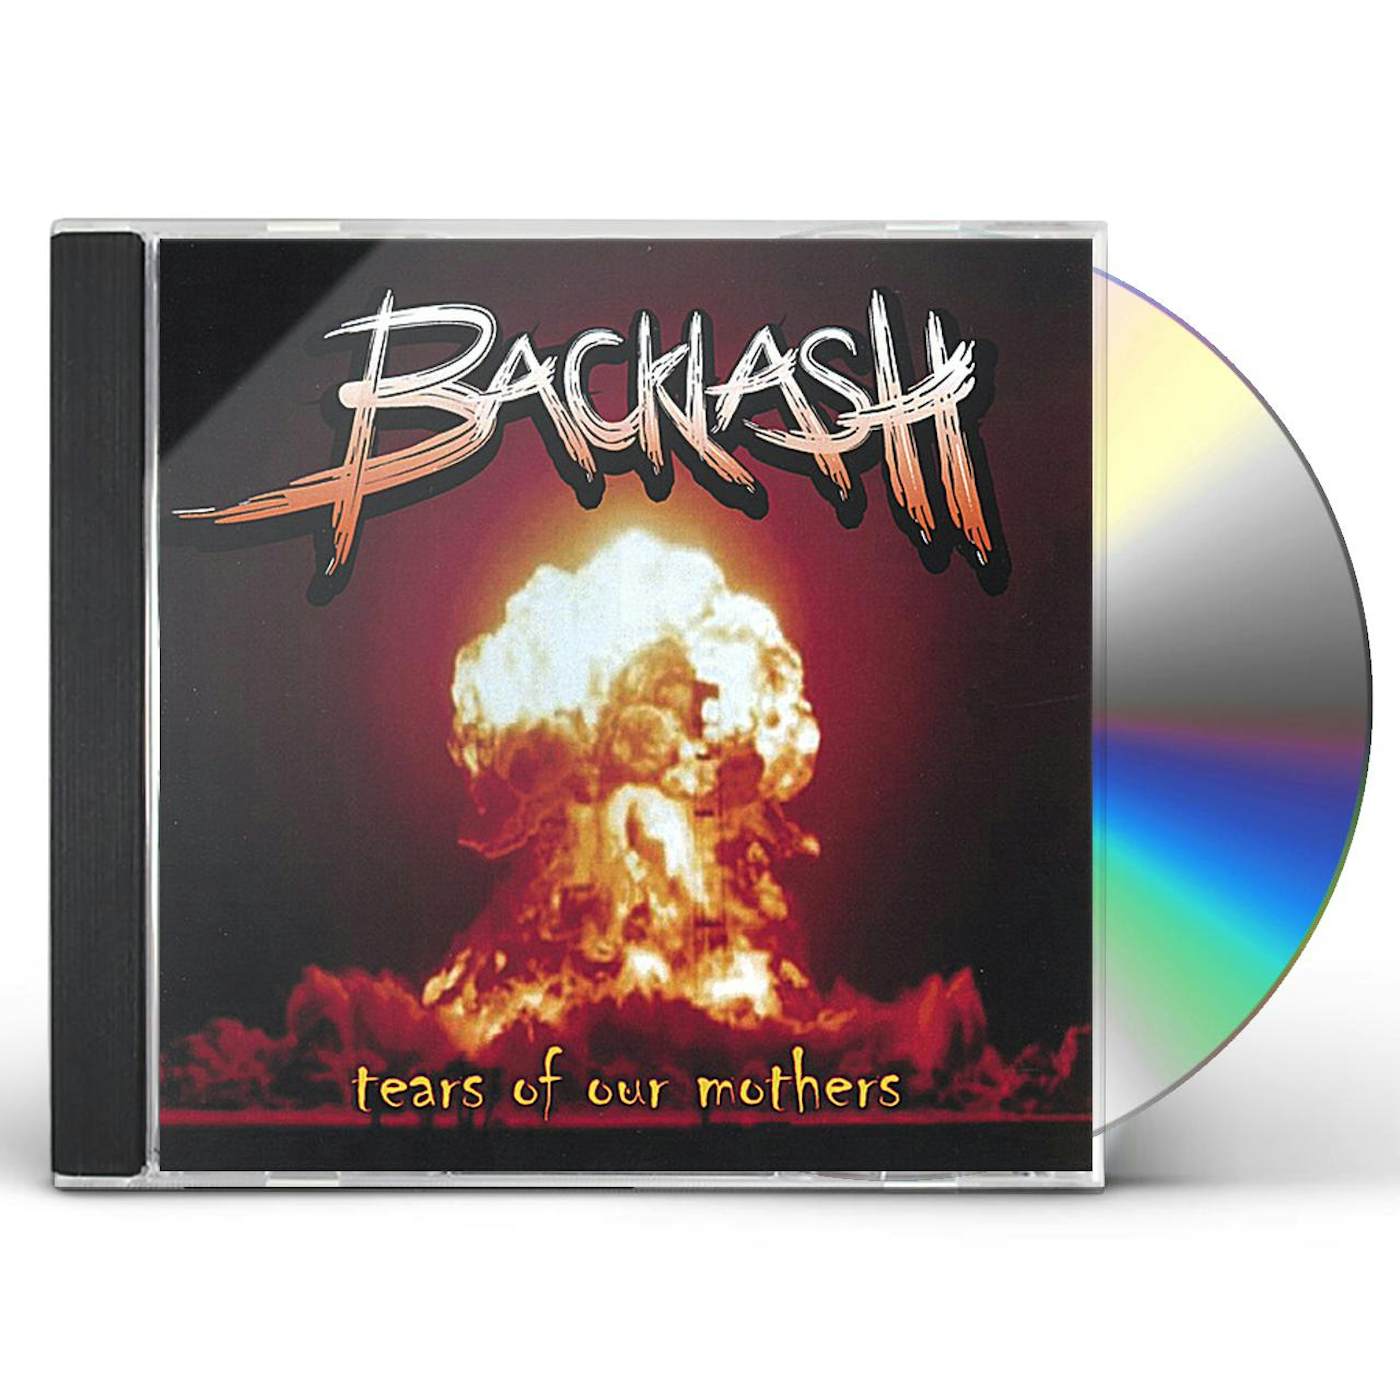 Backlash TEARS OF OUR MOTHERS CD